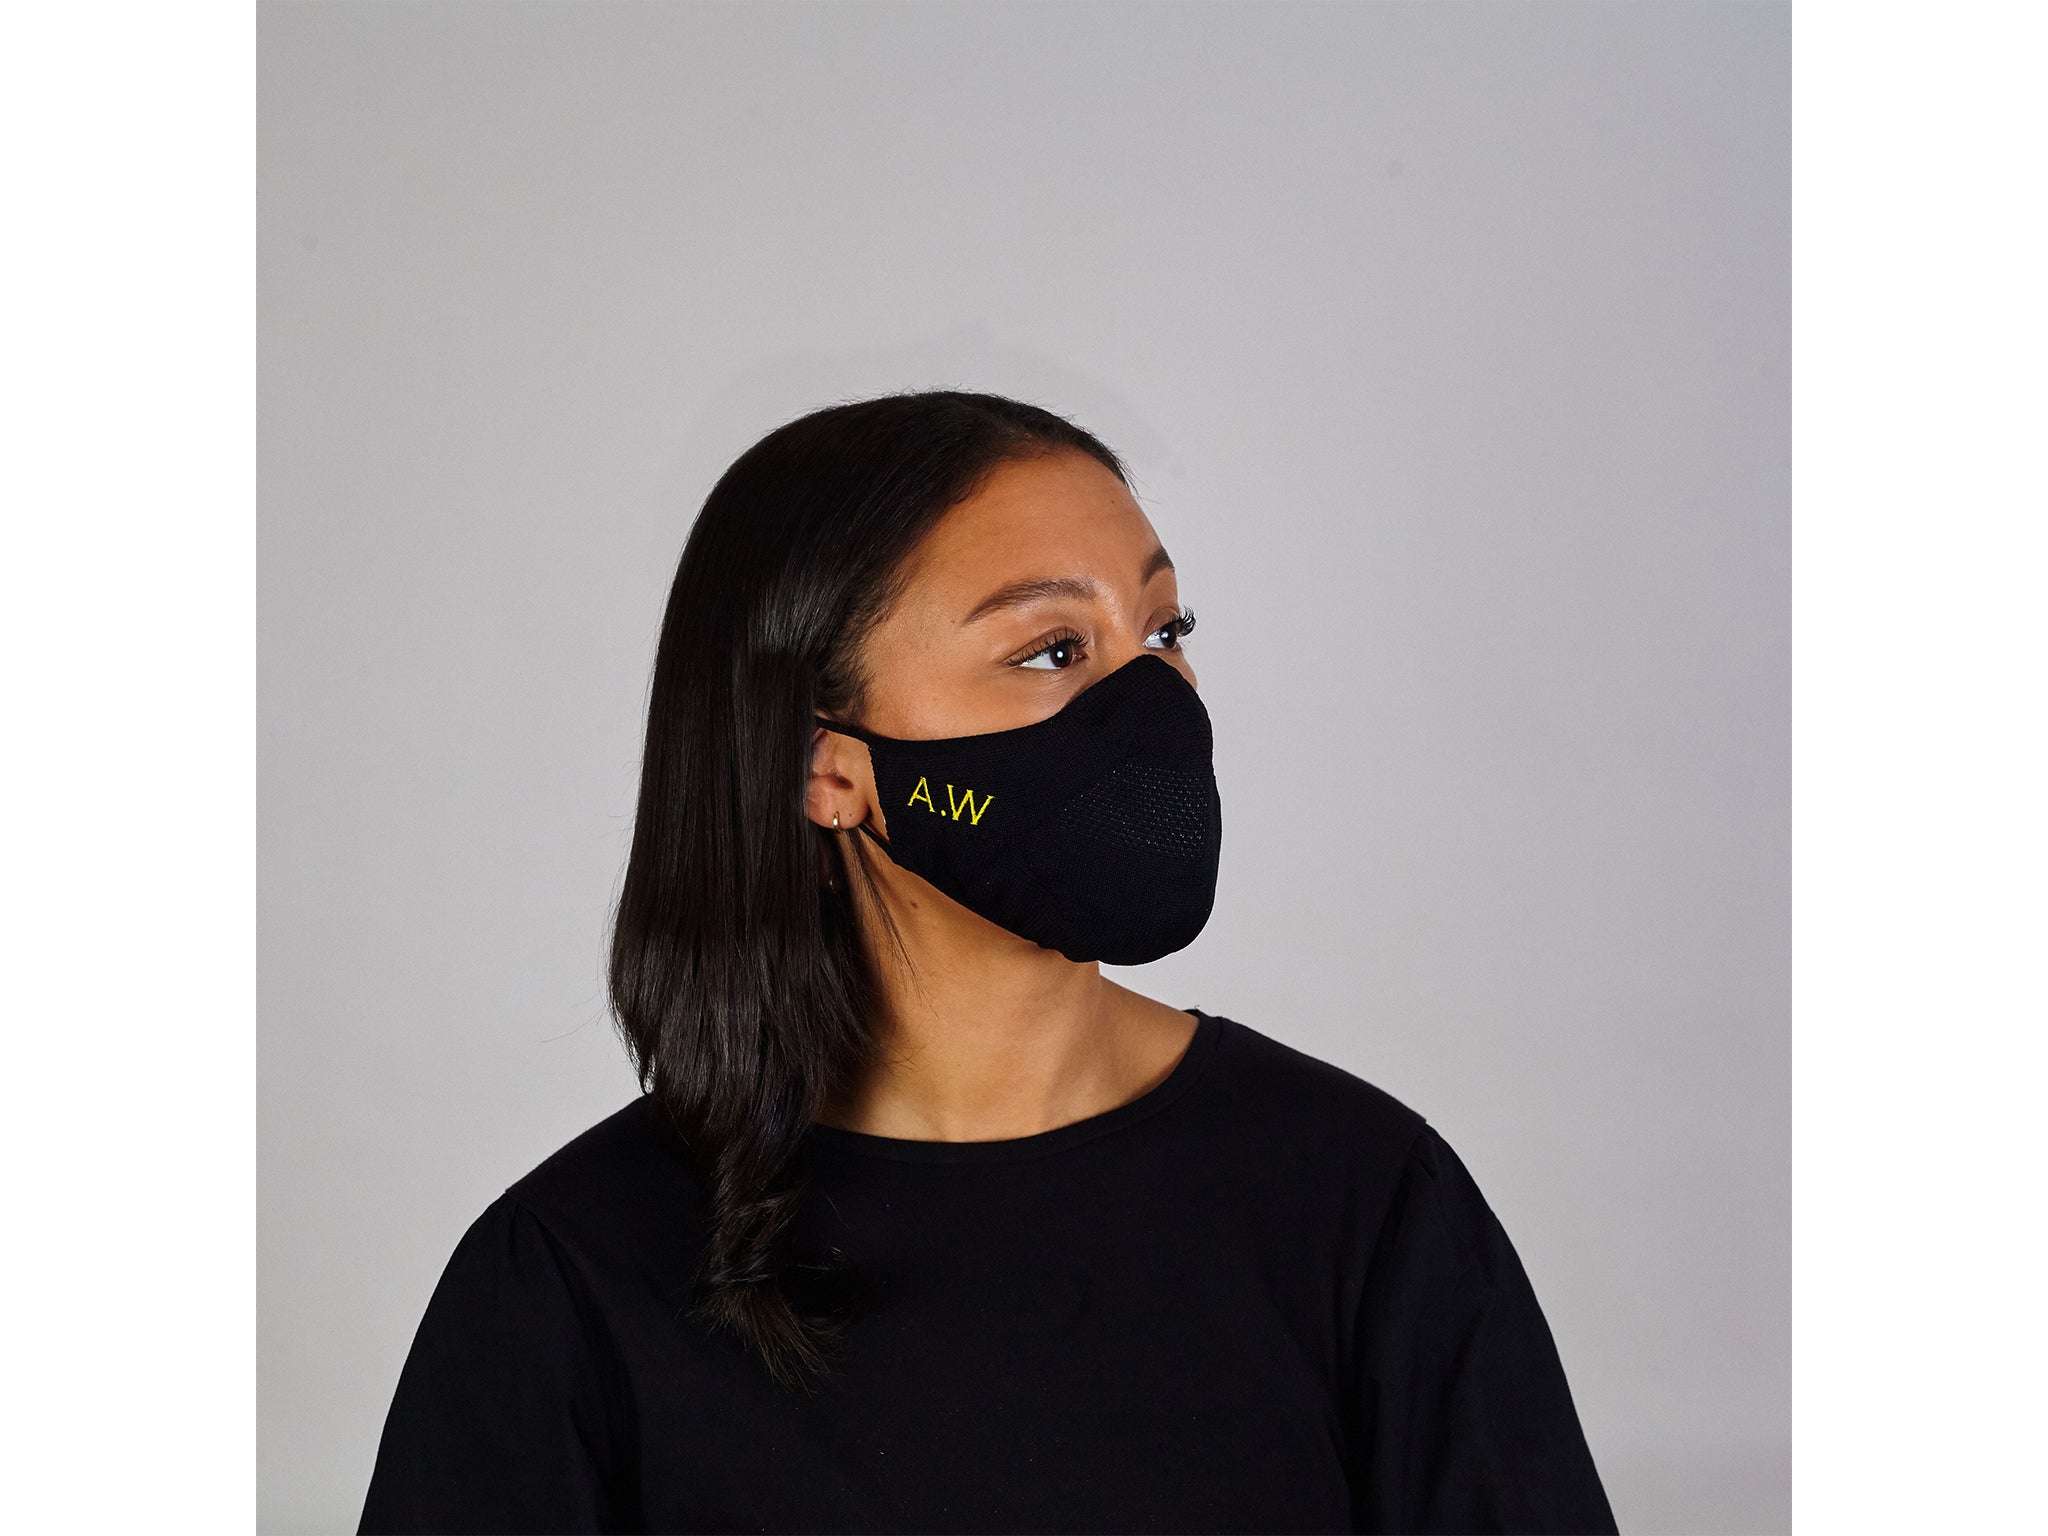 For a personal touch, have your initials or star signs embroidered onto one of these masks